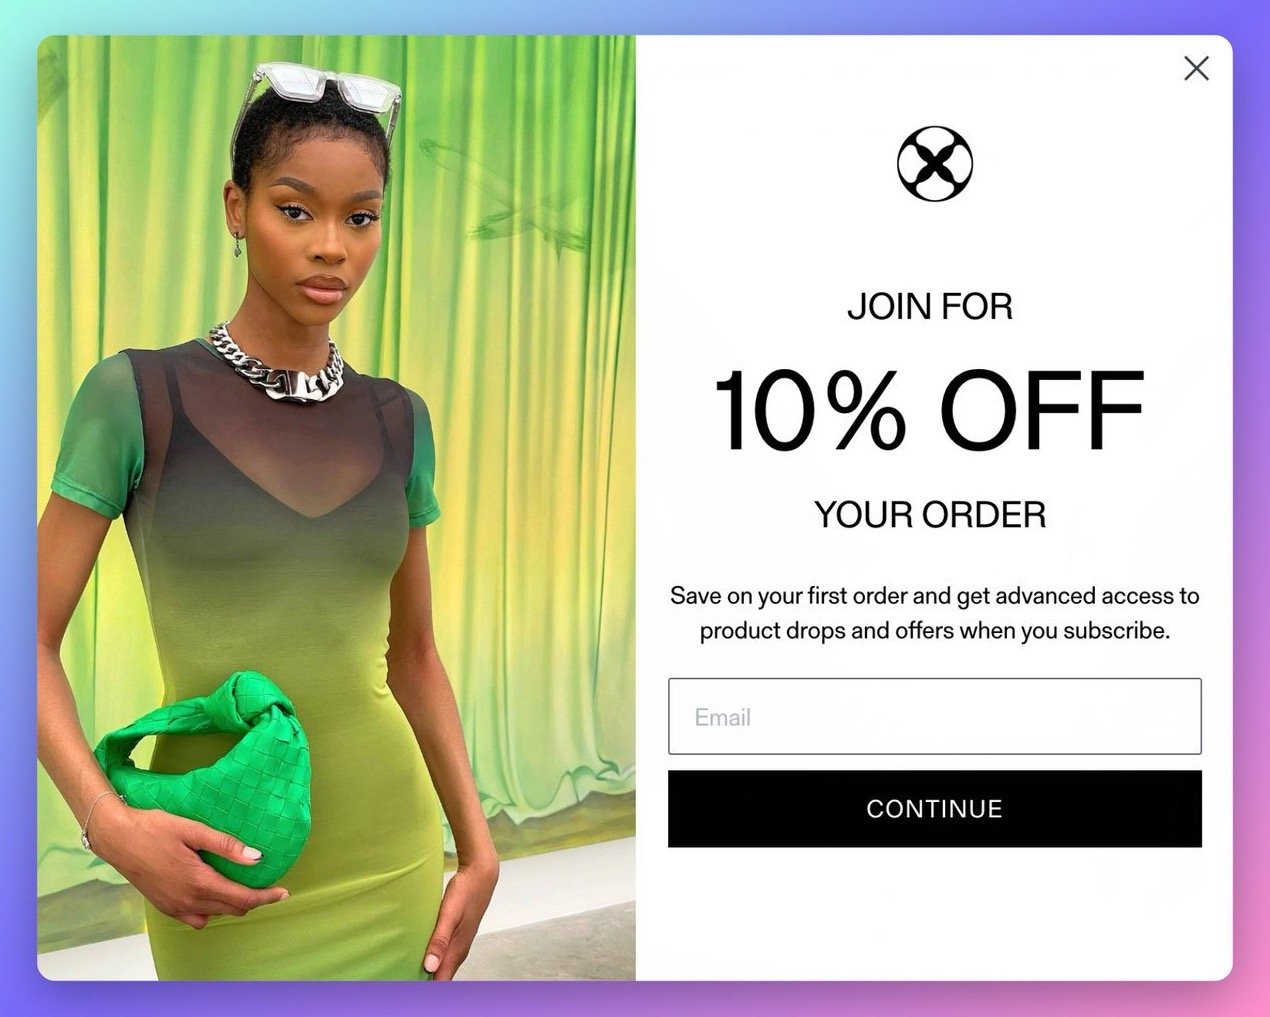 Vitaly brand's popup example with a picture of a girl wearing a green dress holding a green purse in her hand, the popup is offering 10%off in return for users' email address